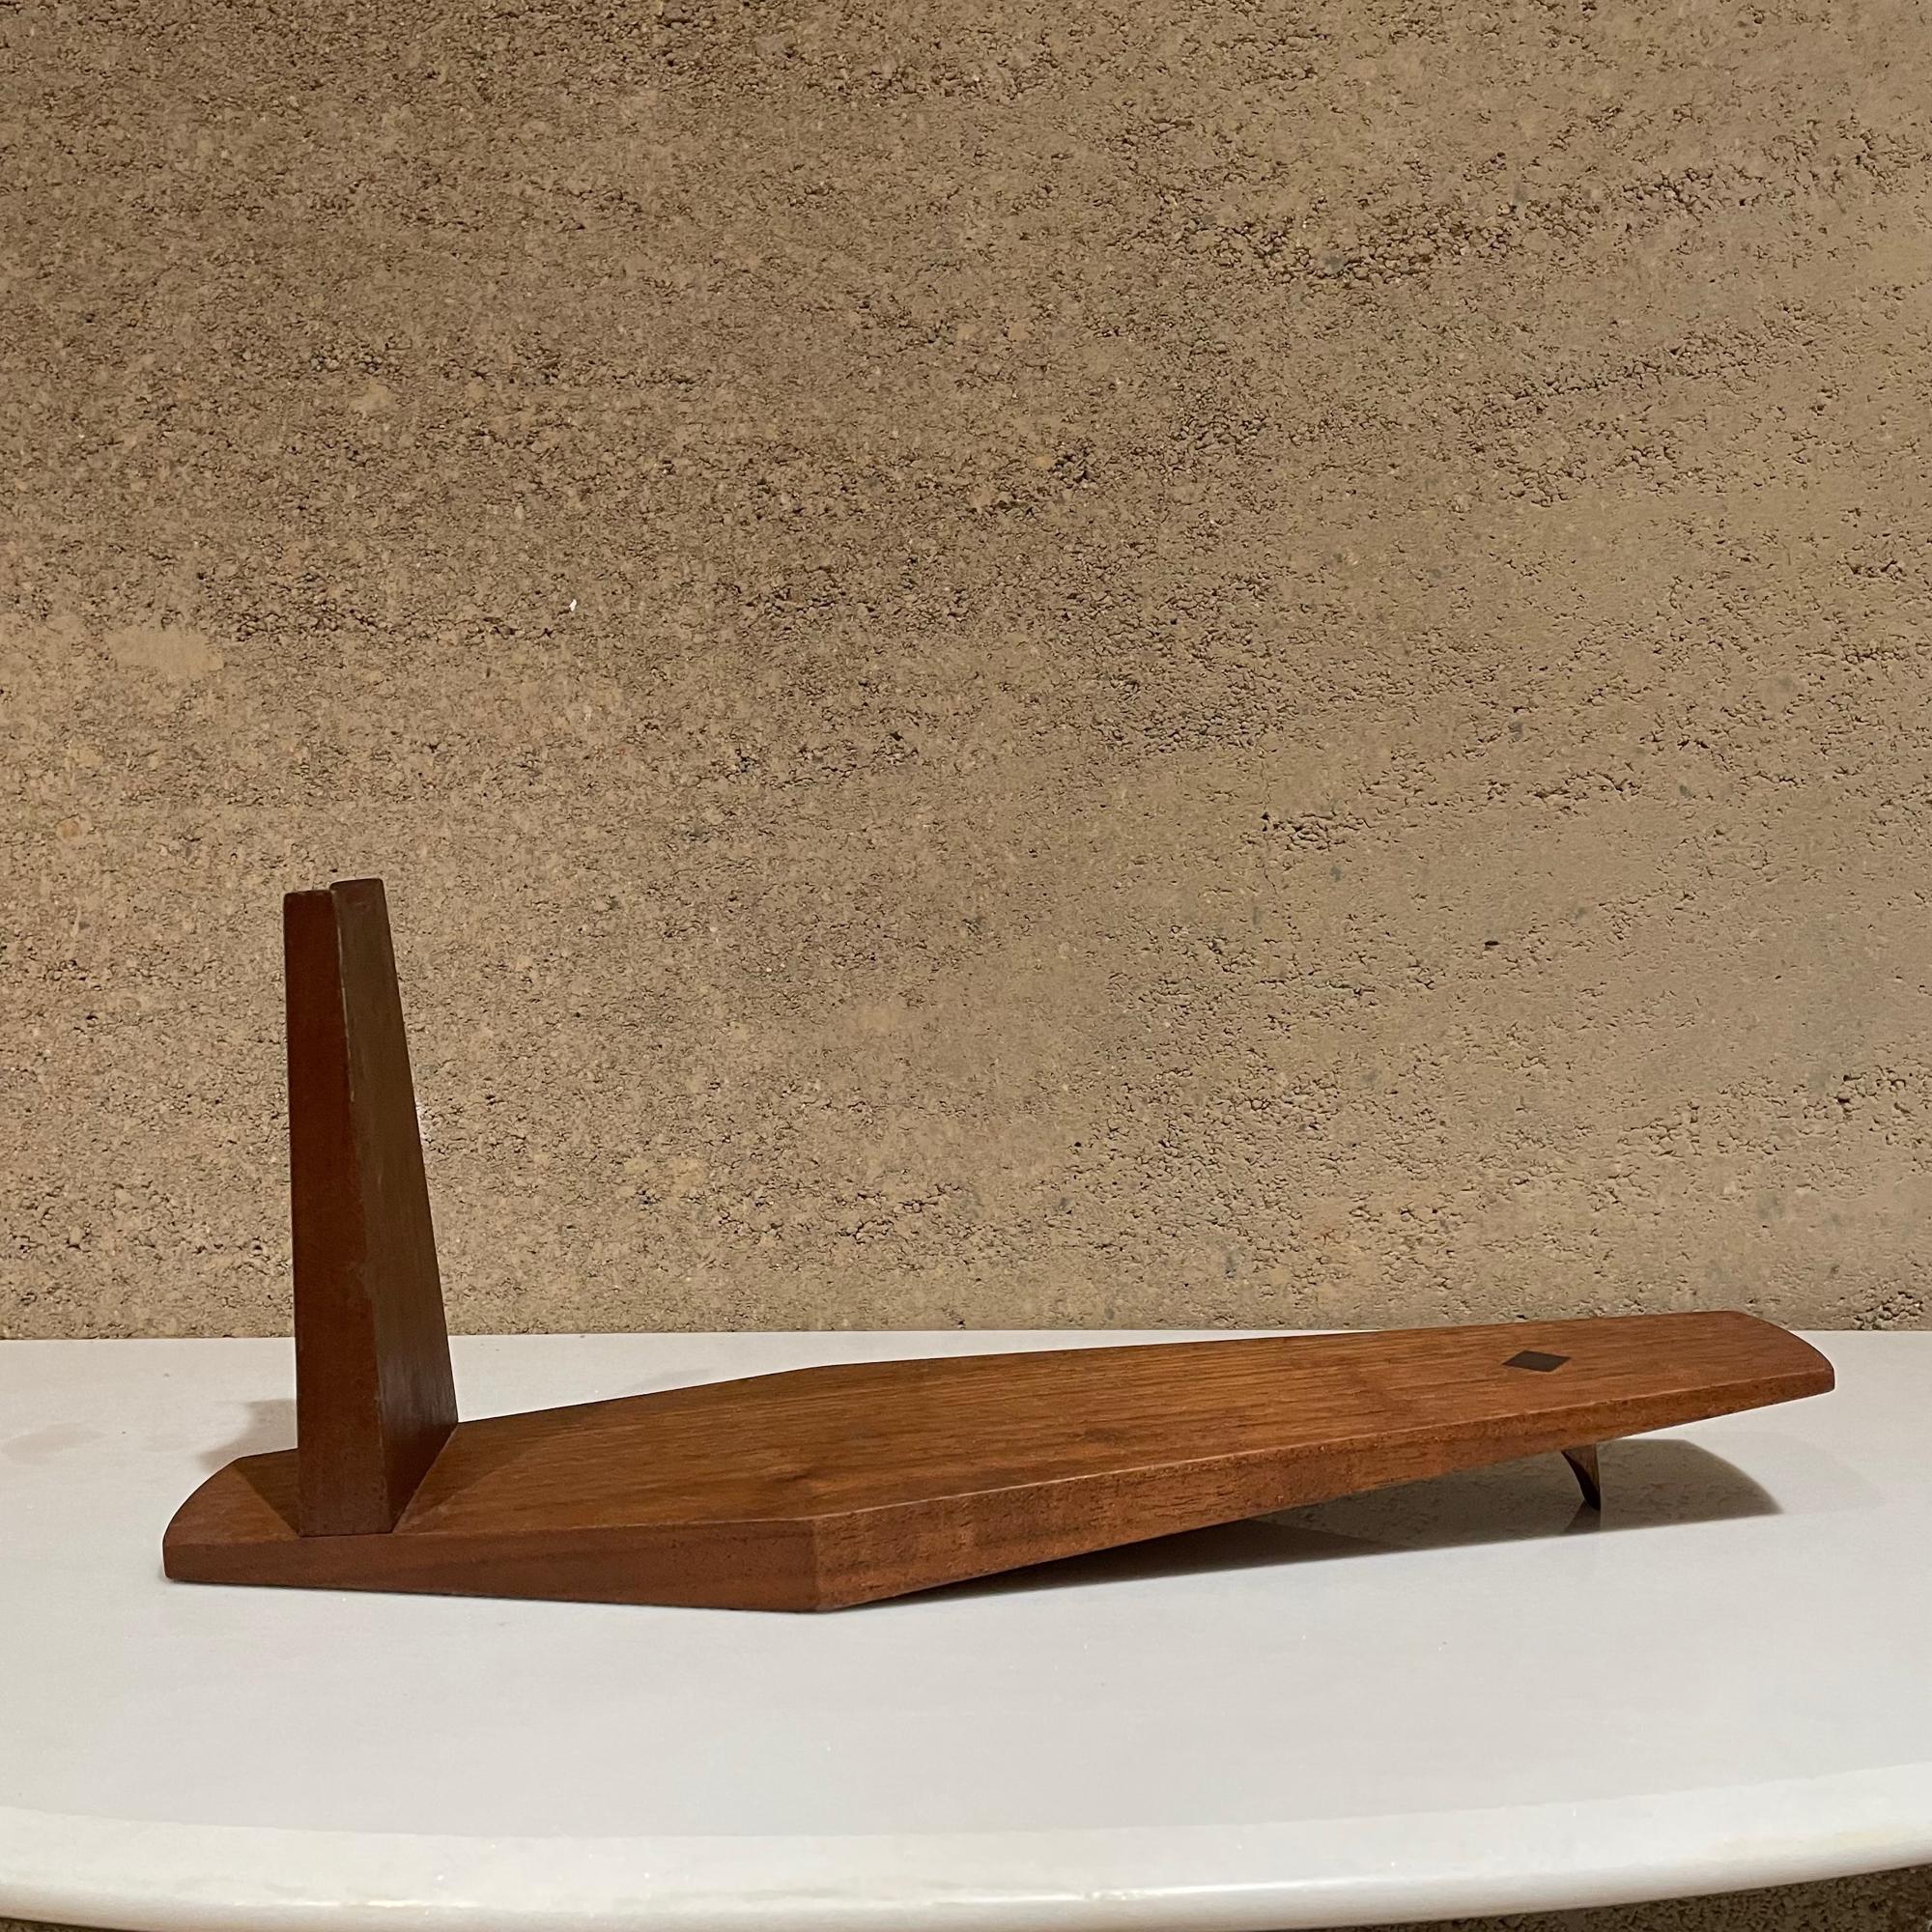 Artsy Bottle Holder
Artful modernist solid wood wine bottle cradle holder stand studio piece 1960s California Craft.
Unmarked
Made of solid wood in exotic Rosewood and Walnut. 
Measures: 6.5 tall x 16 L x 4.5 W inches
Refer to images.
Original